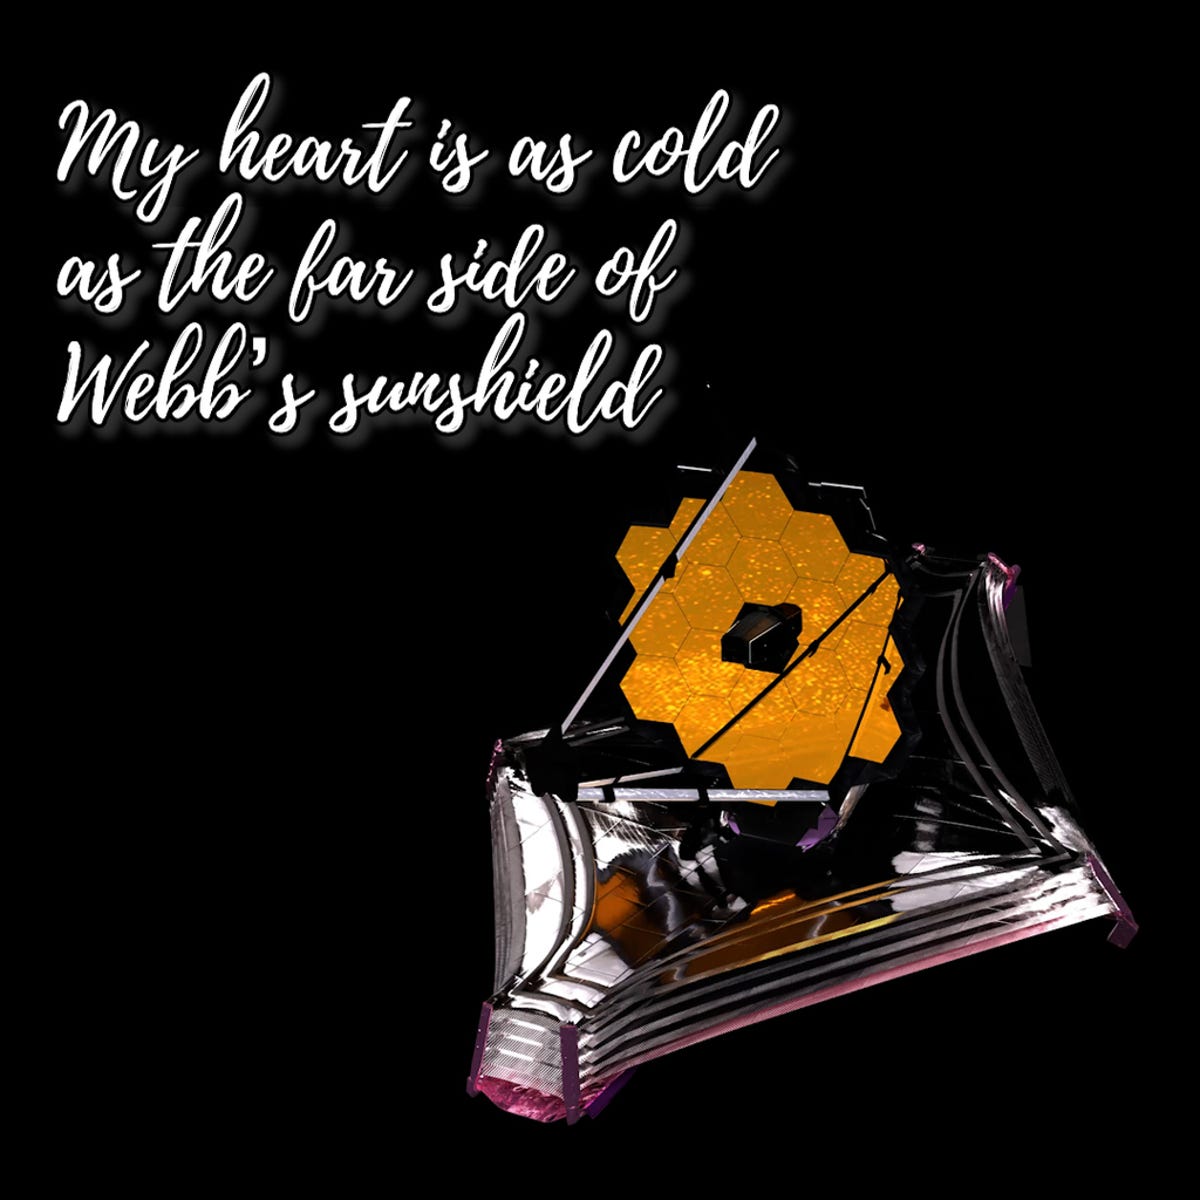 Webb telescope against a black backdrop. The telescope is in the bottom right corner. It has a mirror made of 18 gold hexagons fitted together like honeycomb, pointed toward the bottom left. Below the primary mirror, the telescope's sunshield is silver and shaped like a diamond. In curly white font in the top left corner, text reads "My heart is as cold as the far side of Webb's sunshield."